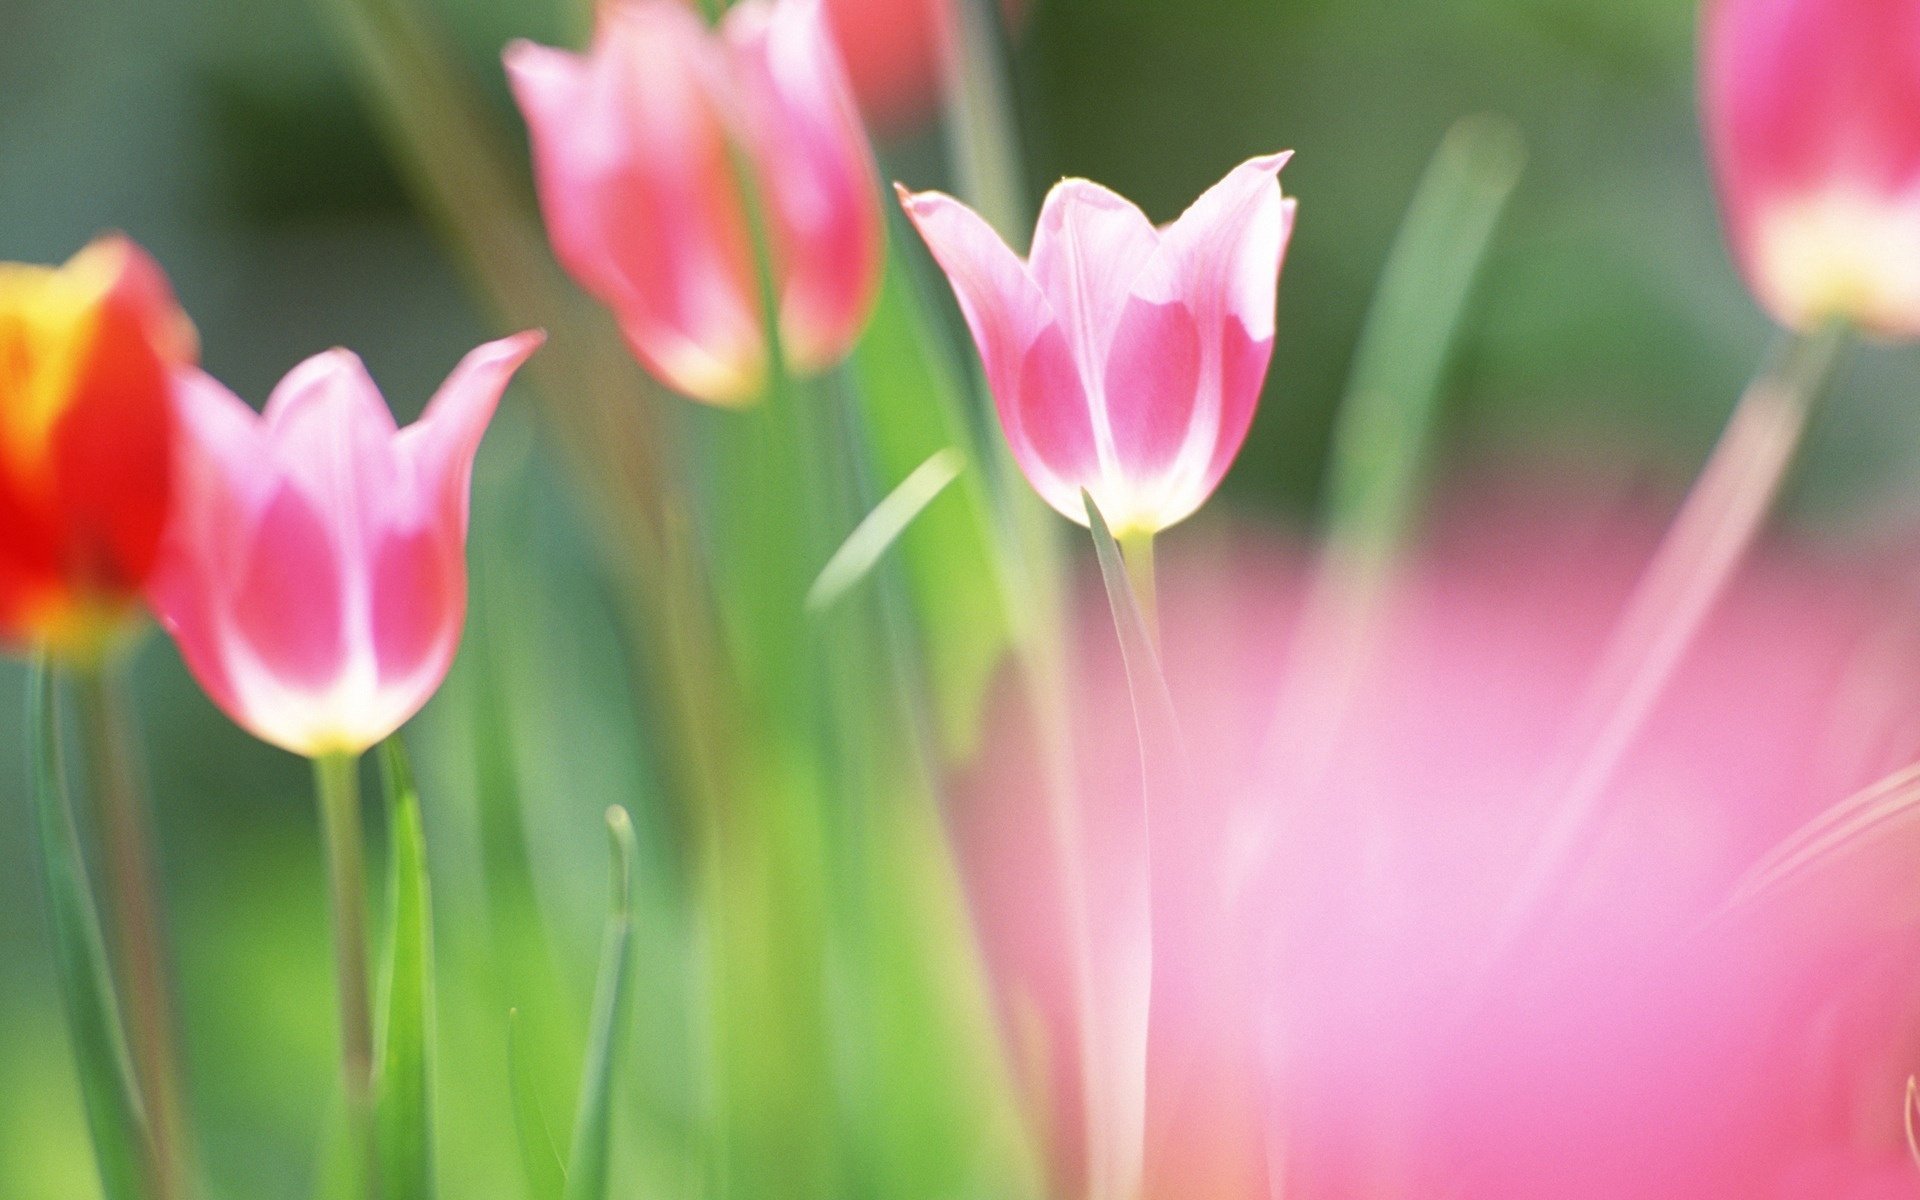 Tulips with a white center on a blurry green-pink background